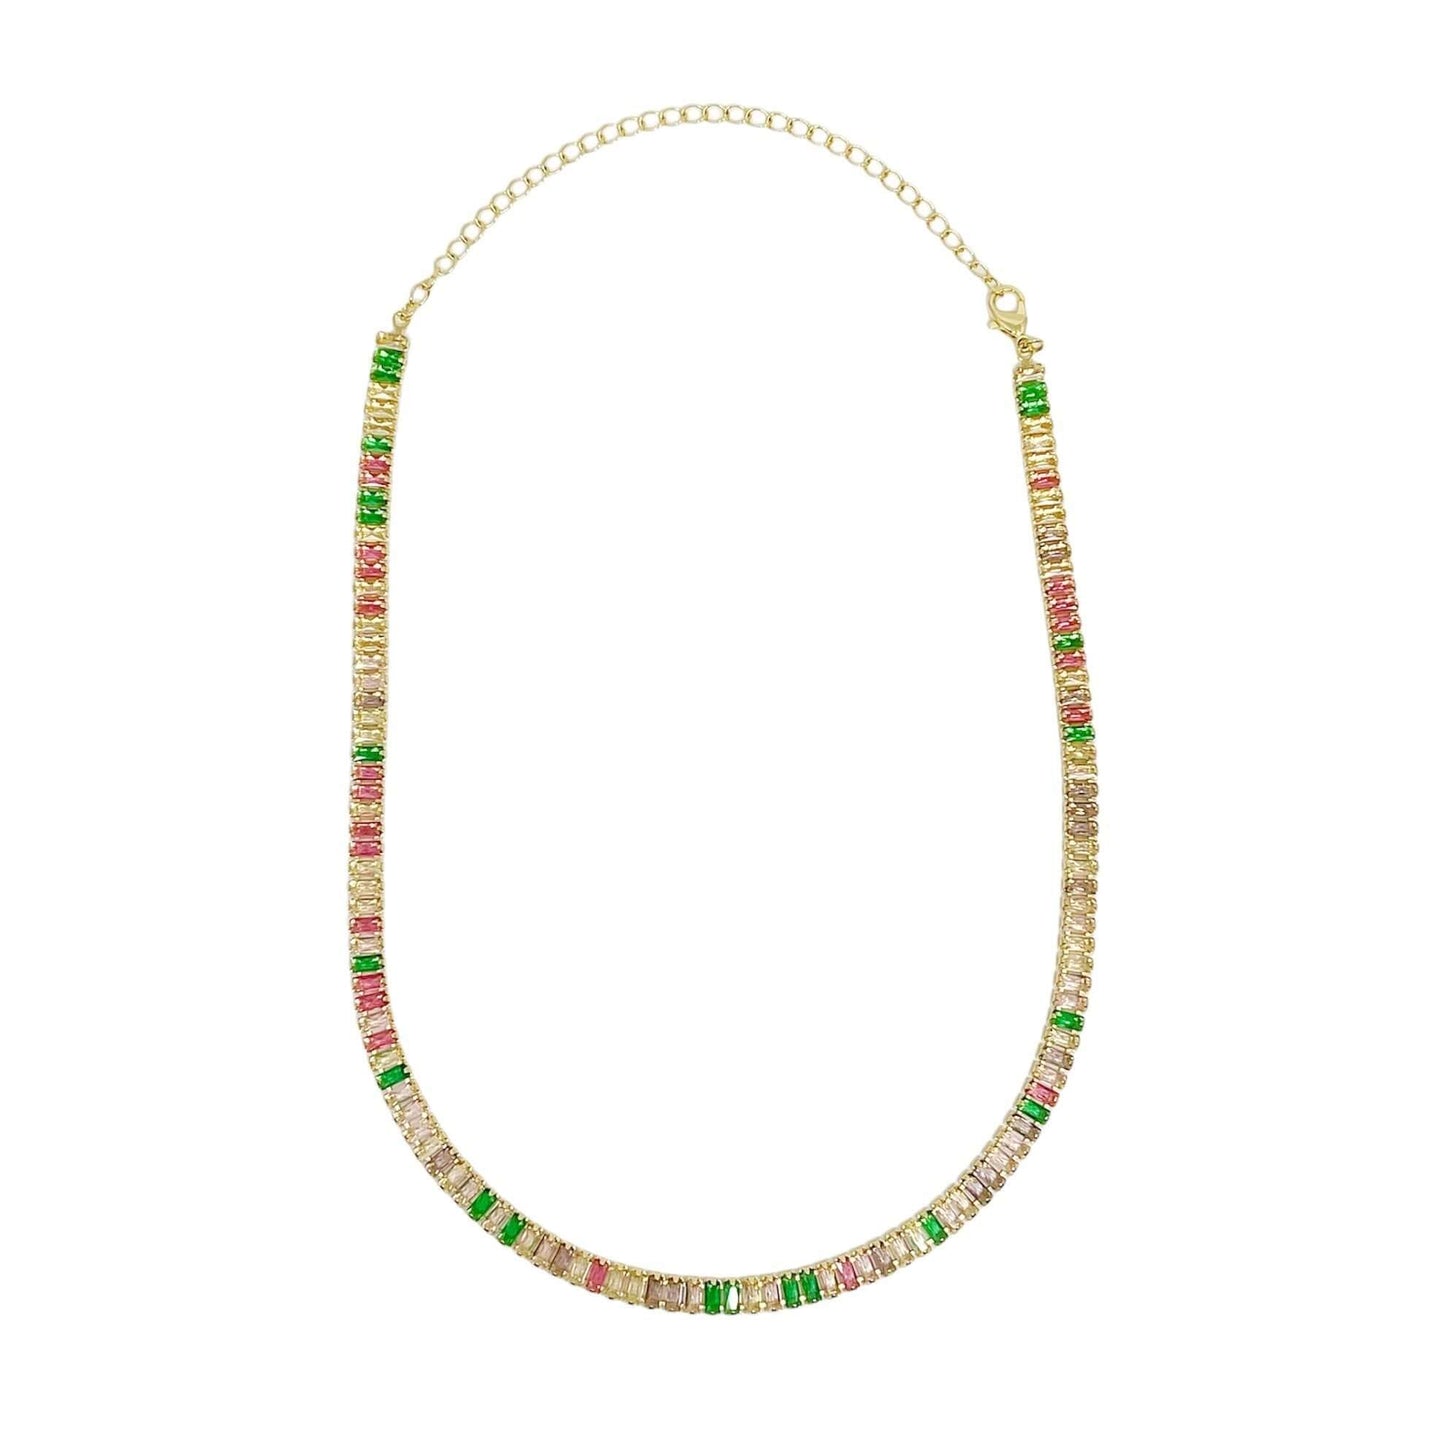 GoldFi 18k Gold Filled Colorful Cubic Zirconia Choker Necklace